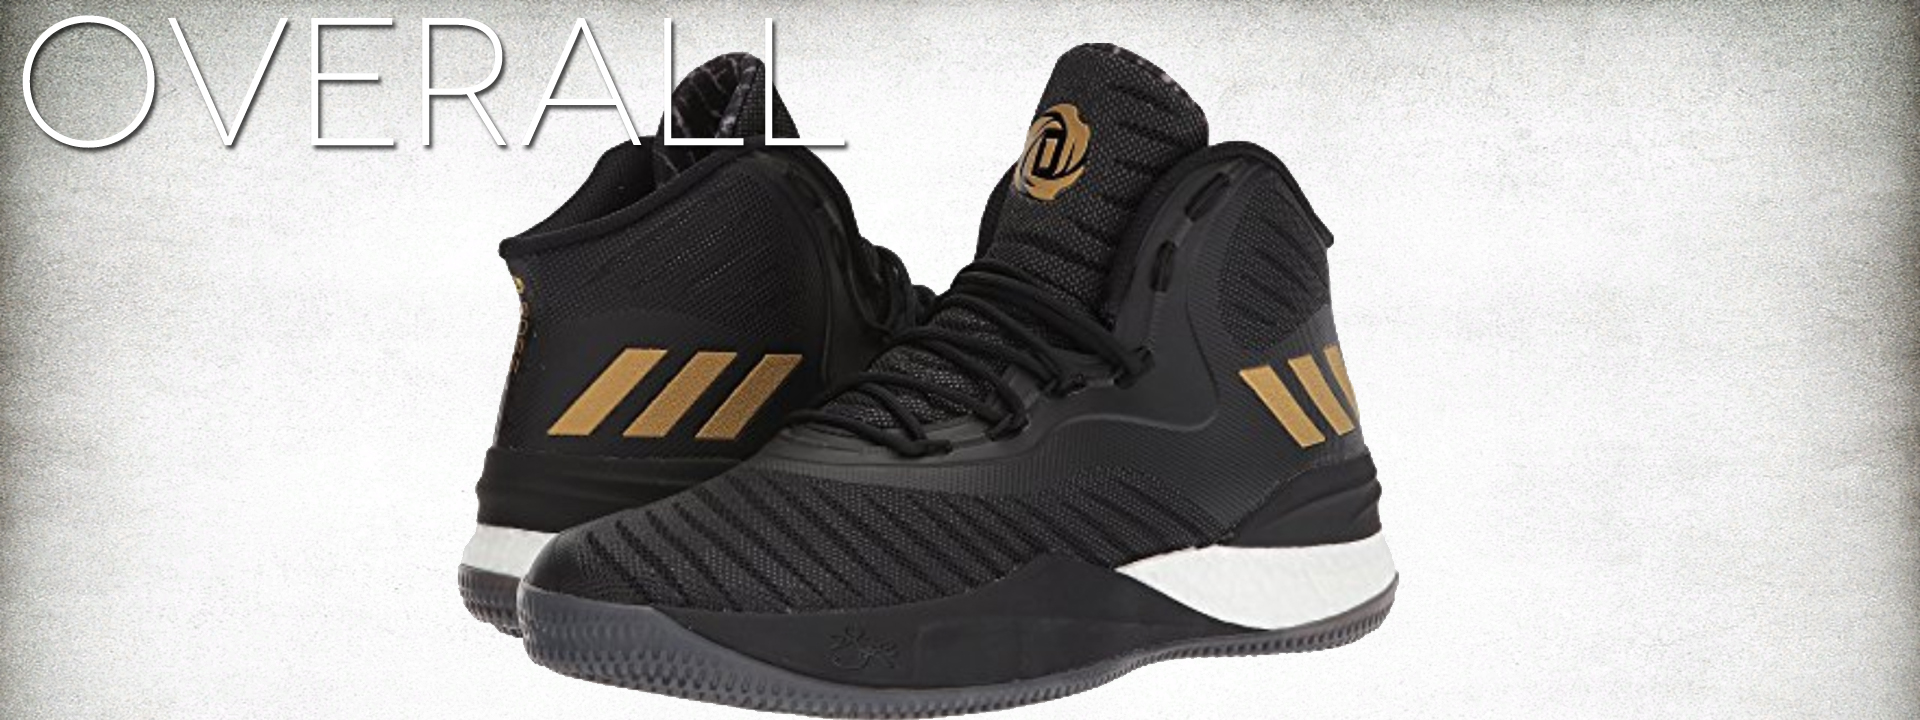 adidas d rose 8 performance review overall